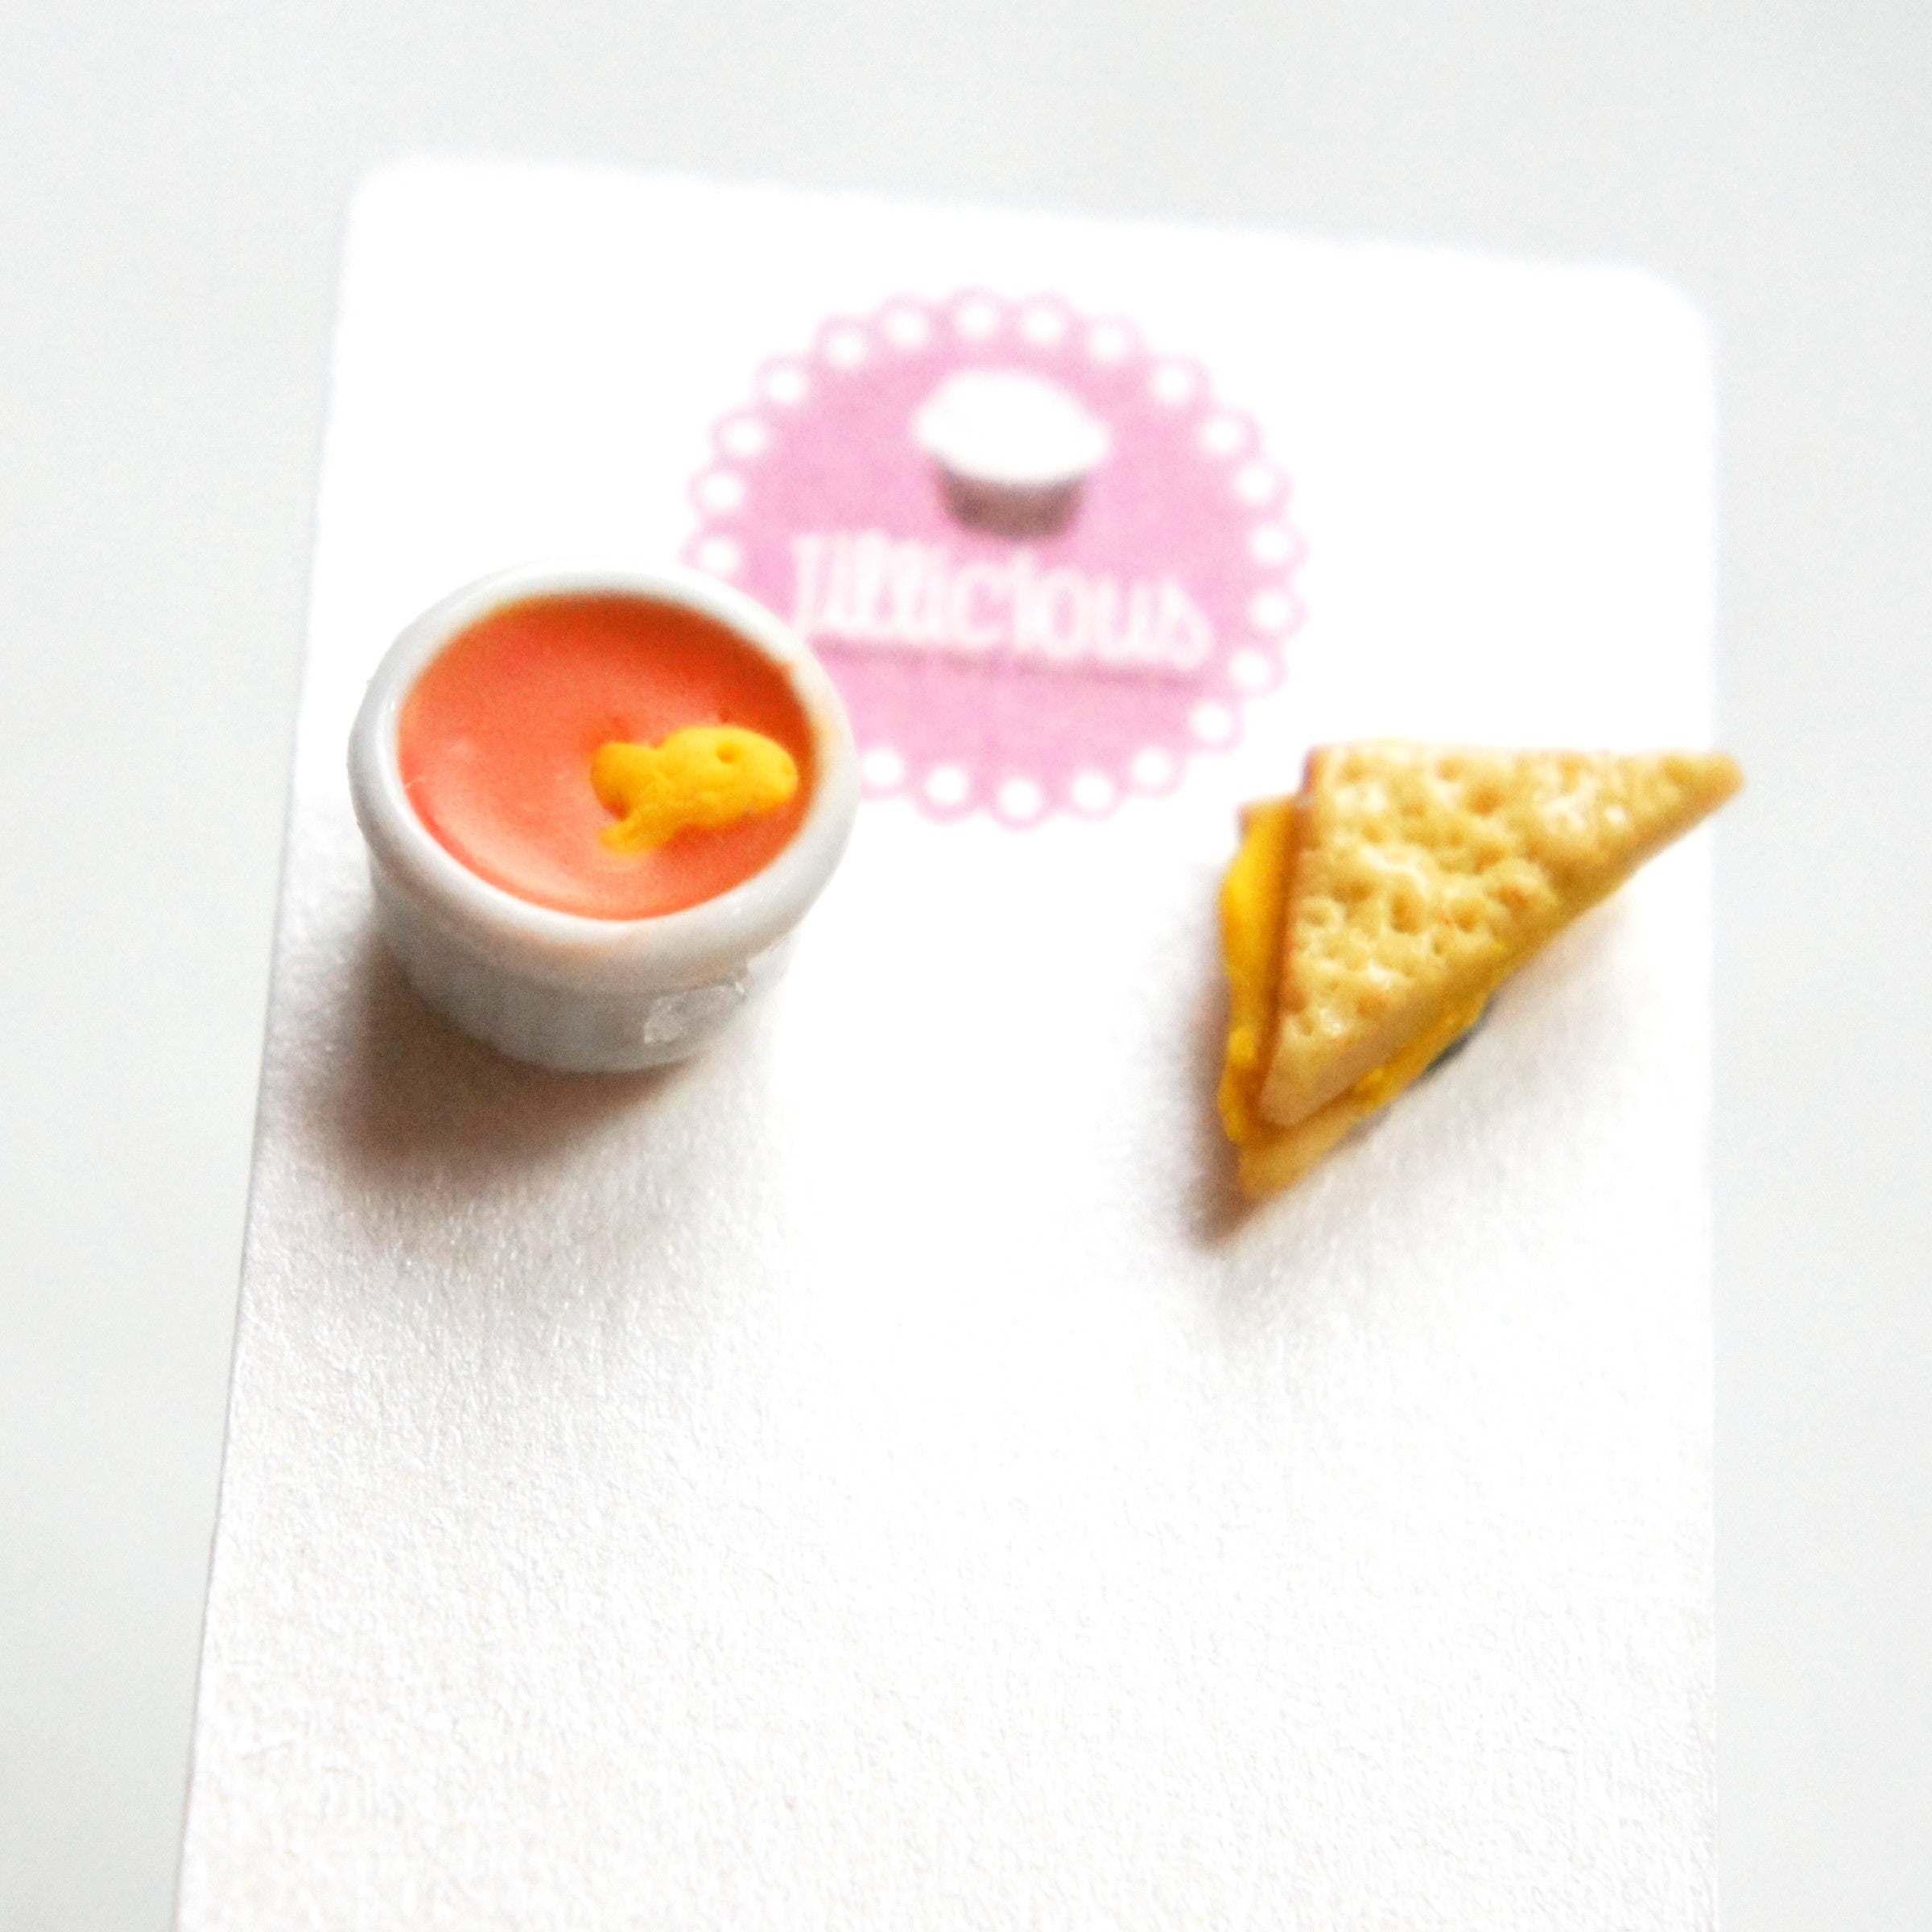 Grilled Cheese Sandwich and Tomato Soup Earrings